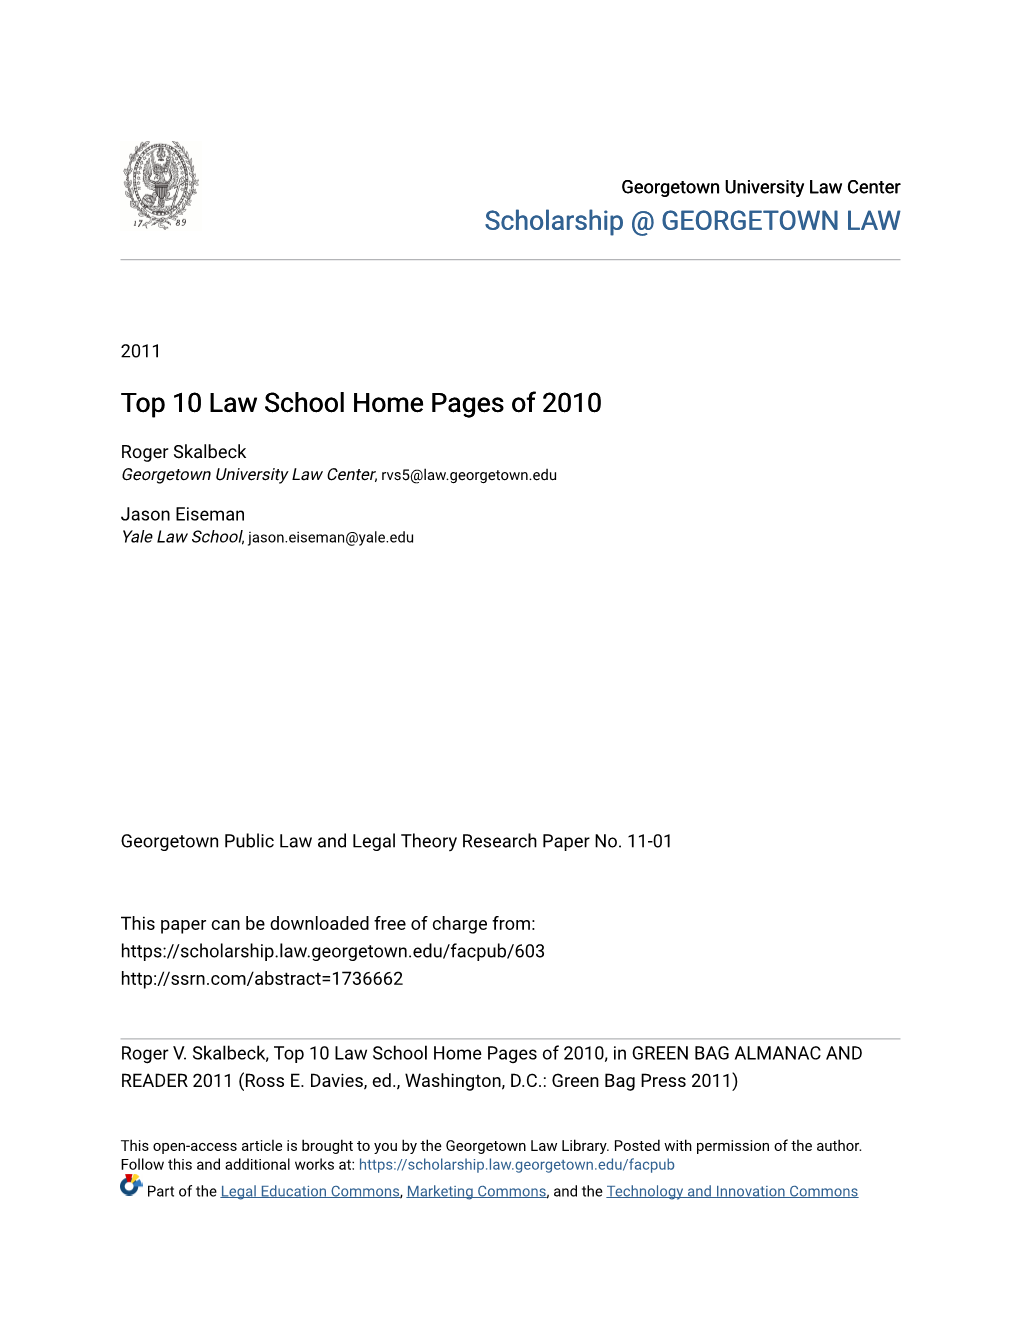 Top 10 Law School Home Pages of 2010